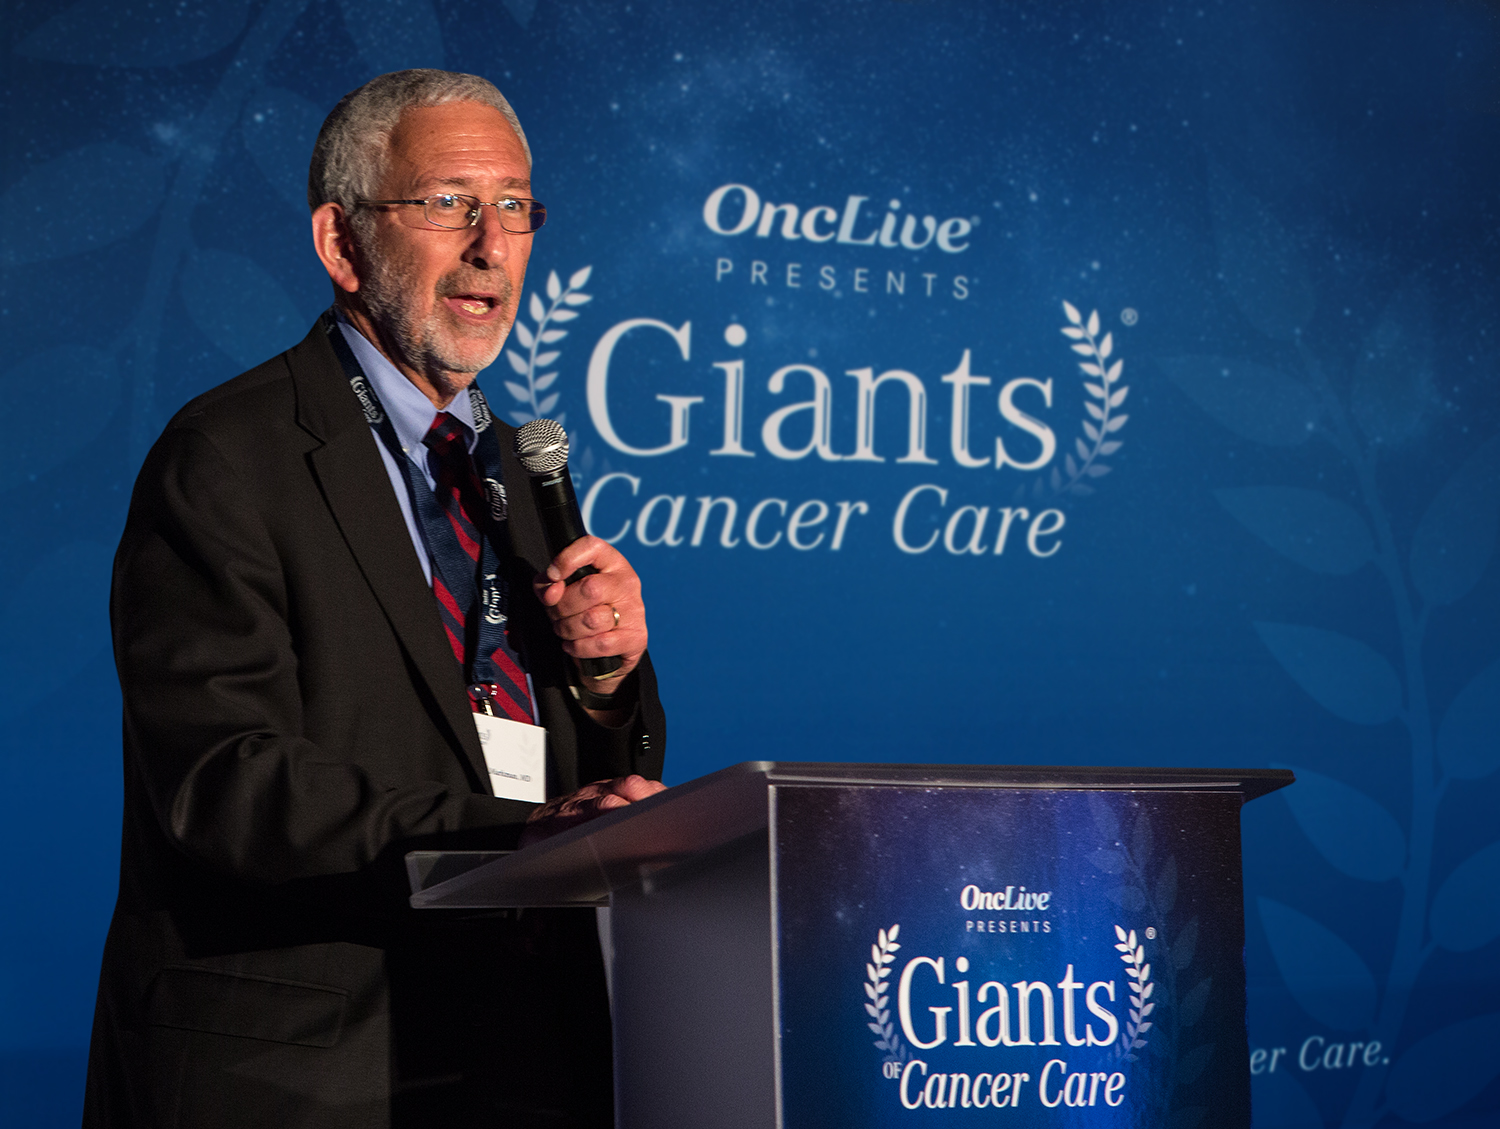 Giants of Cancer Care advisory board chairman Dr. Maurie Markman from Cancer Treatment Centers of America announces finalists for 2016 Giants of Cancer Care® Awards.